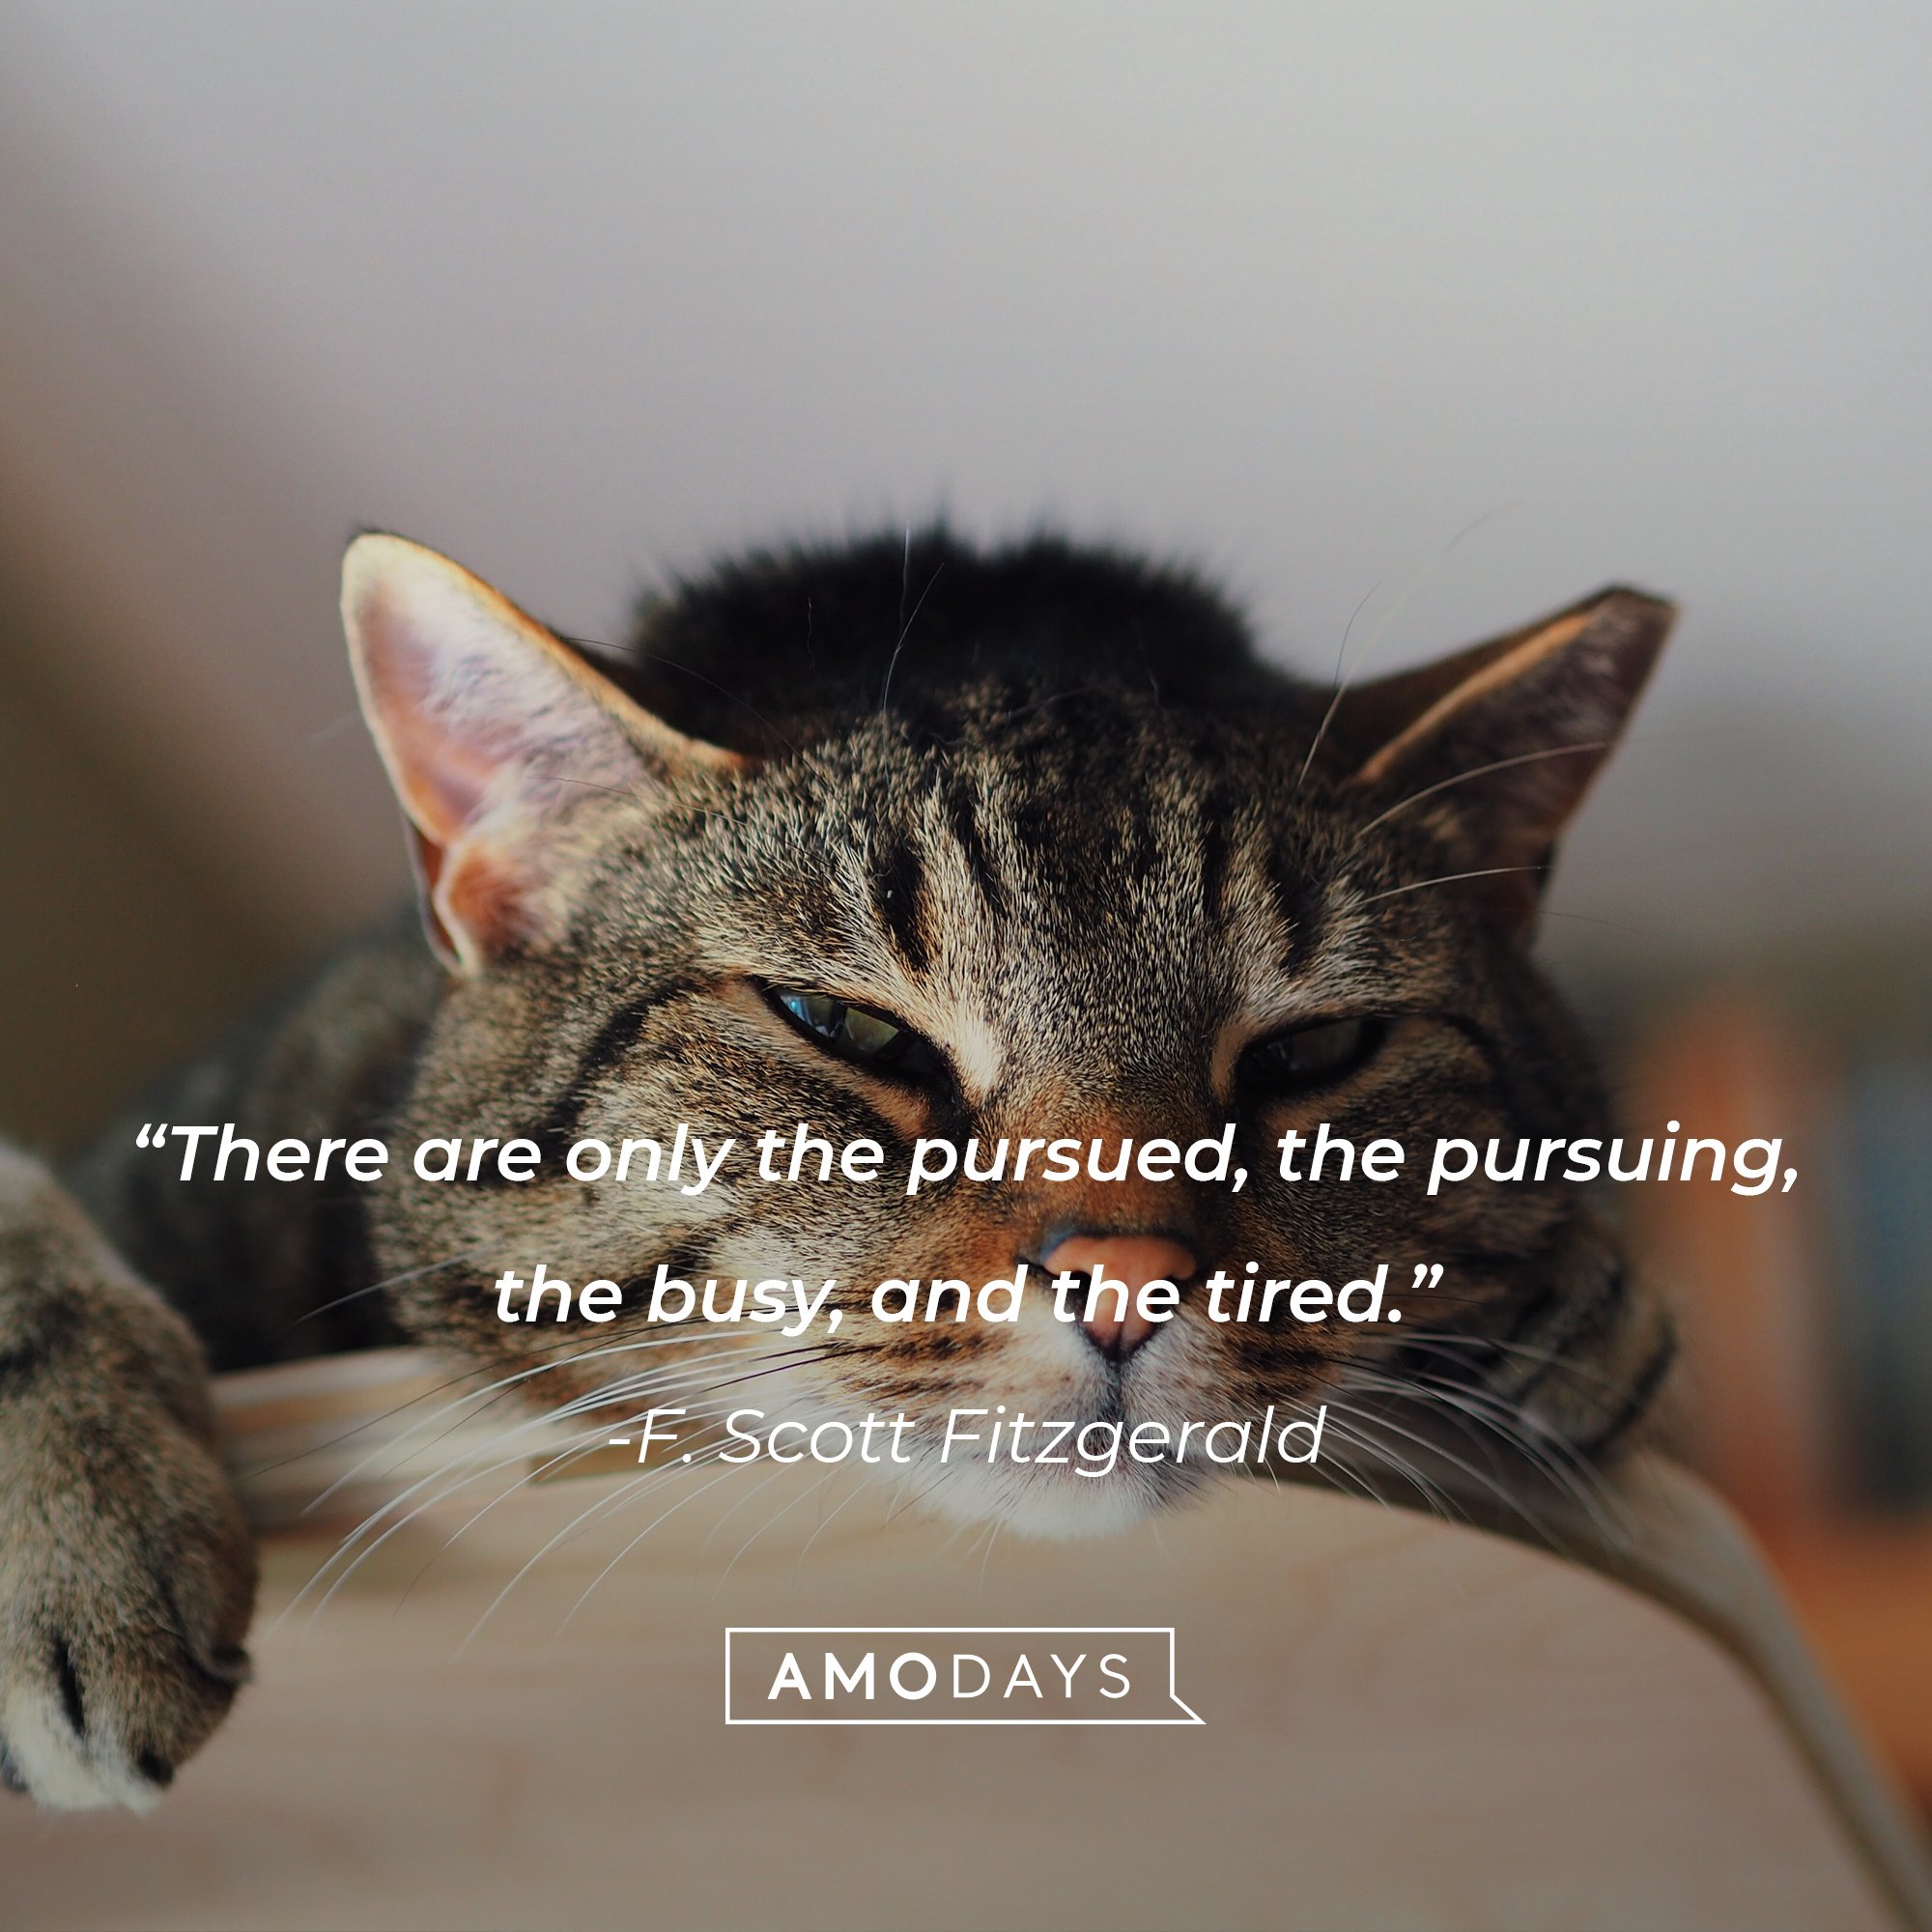 F. Scott Fitzgerald's quote: "There are only the pursued, the pursuing, the busy, and the tired." | Image: AmoDays